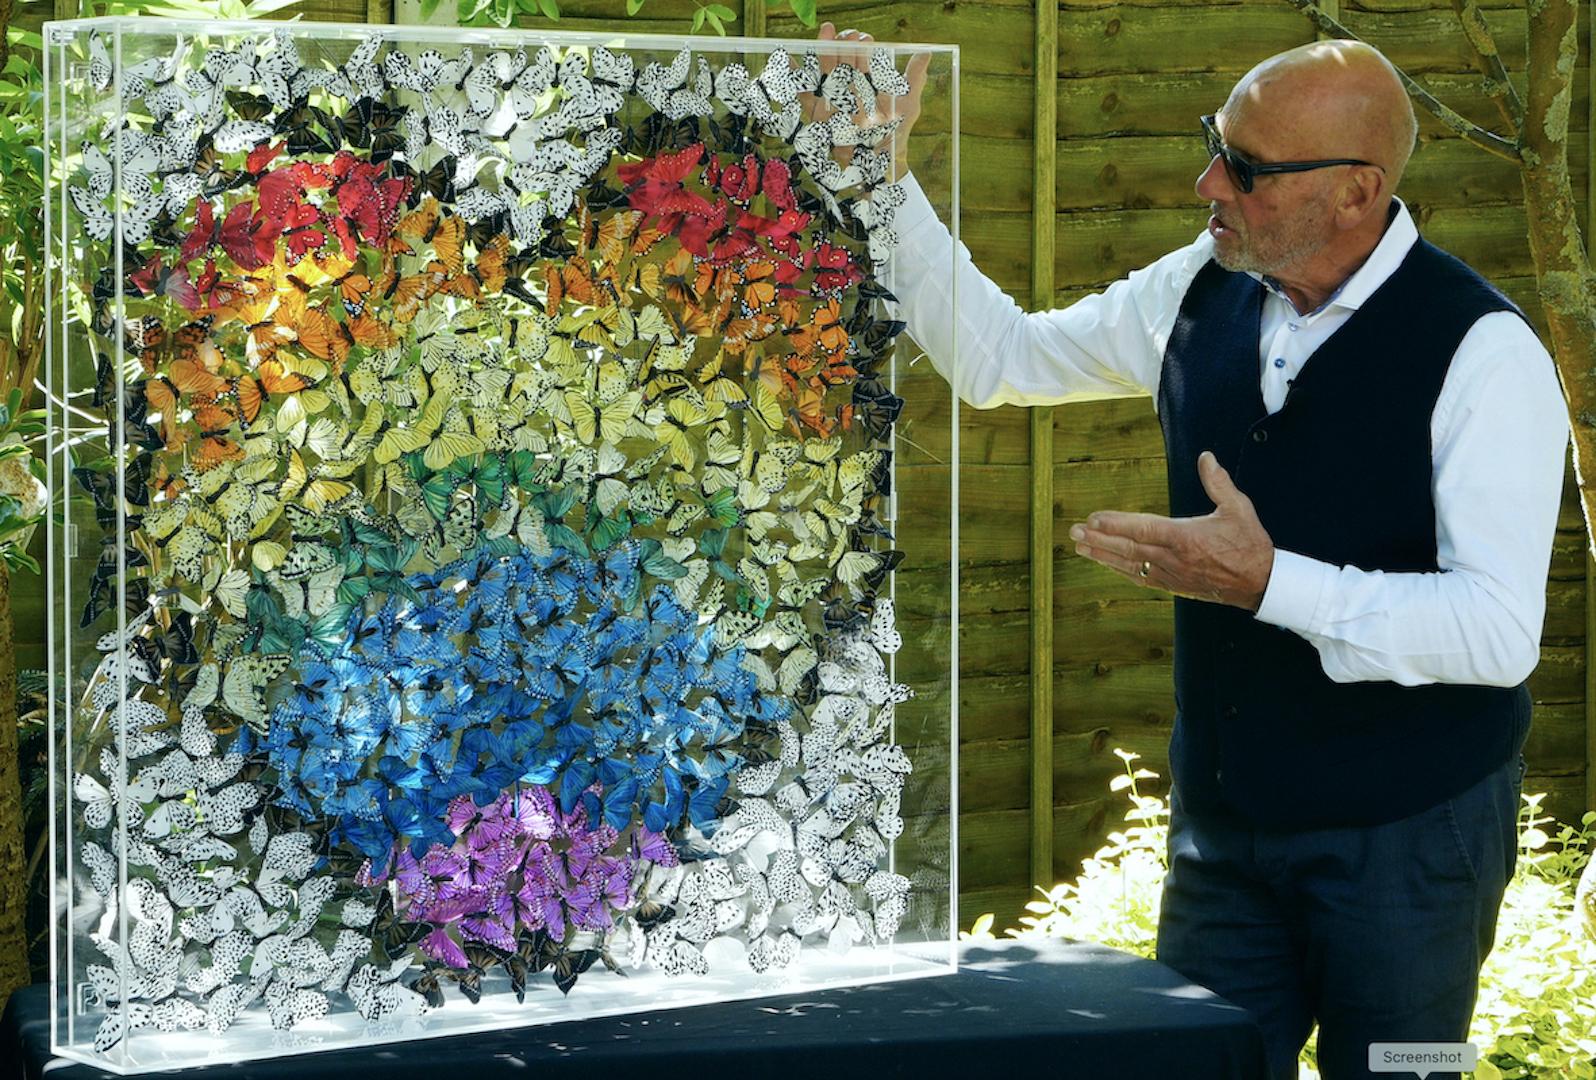 Michael Olsen
Love and Hope
Fabric Butterflies in Perspex box
Box Size: H100cm x W100cm x D 10cm
This work is sold framed in a perspex box and ready to hang.
(Please note that in situ images are purely an indication of how a piece may look)

The